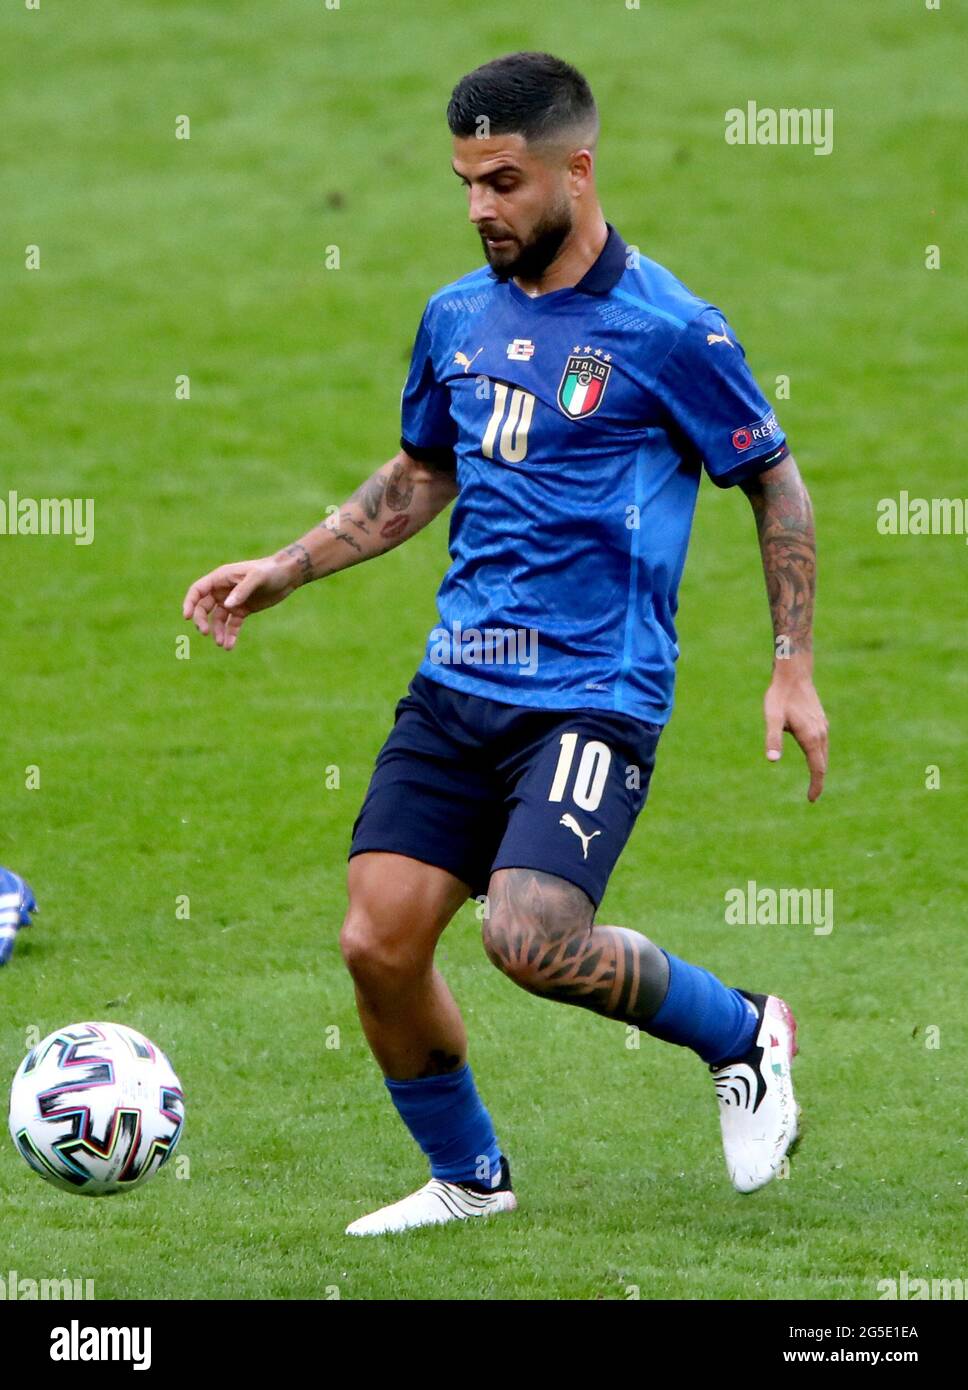 Italy's Lorenzo Insigne (right) and Austria's Stefan Lainer battle for the ball during the UEFA Euro 2020 round of 16 match held at Wembley Stadium, London. Picture date: Saturday June 26, 2021. Stock Photo